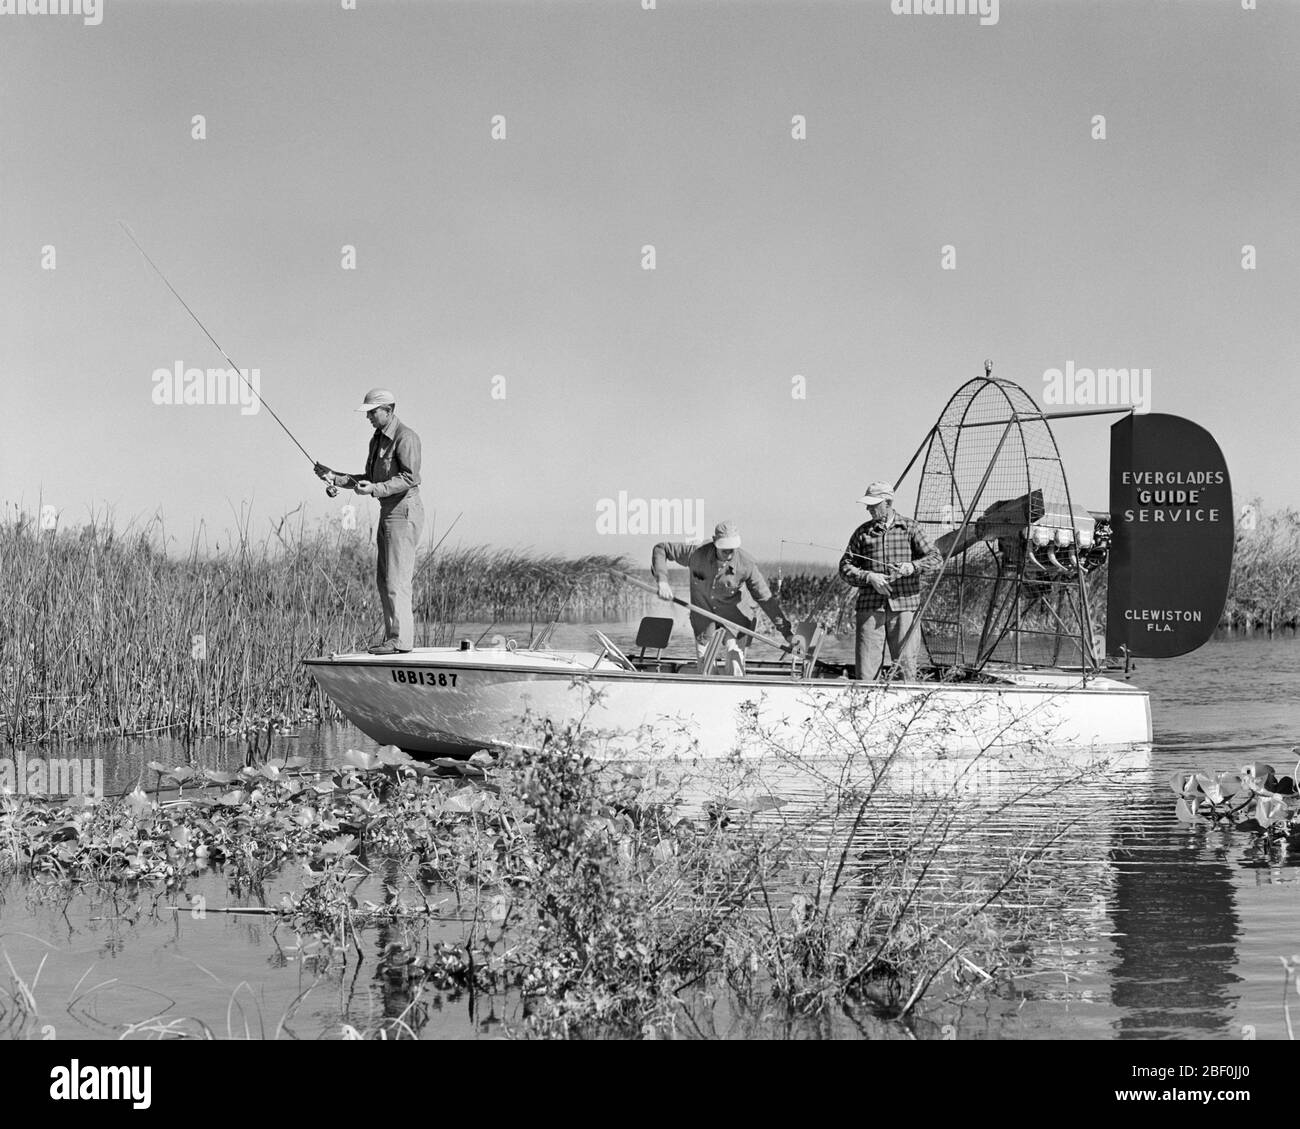 1950s THREE MEN ONBOARD AIR BOAT LARGEMOUTH BASS SPORT FISHING ON VACATION TRIP LAKE OKEECHOBEE EVERGLADES CLEWISTON FLORIDA USA - a2659 HAR001 HARS FRIENDSHIP FULL-LENGTH PERSONS SCENIC UNITED STATES OF AMERICA MALES HOOK TRANSPORTATION B&W NORTH AMERICA CATCHING FREEDOM GOALS NORTH AMERICAN TIME OFF WIDE ANGLE TOUR SKILL ACTIVITY AMUSEMENT ADVENTURE HOBBY LEISURE CUSTOMER SERVICE TRIP INTEREST GETAWAY EXCITEMENT HOBBIES KNOWLEDGE LOW ANGLE PARKS RECREATION TOURIST PASTIME BASS REEL PLEASURE ON OPPORTUNITY HOLIDAYS OCCUPATIONS SOUTHERN CONNECTION EVERGLADES GUIDED CONCEPTUAL GUIDE GUIDES Stock Photo